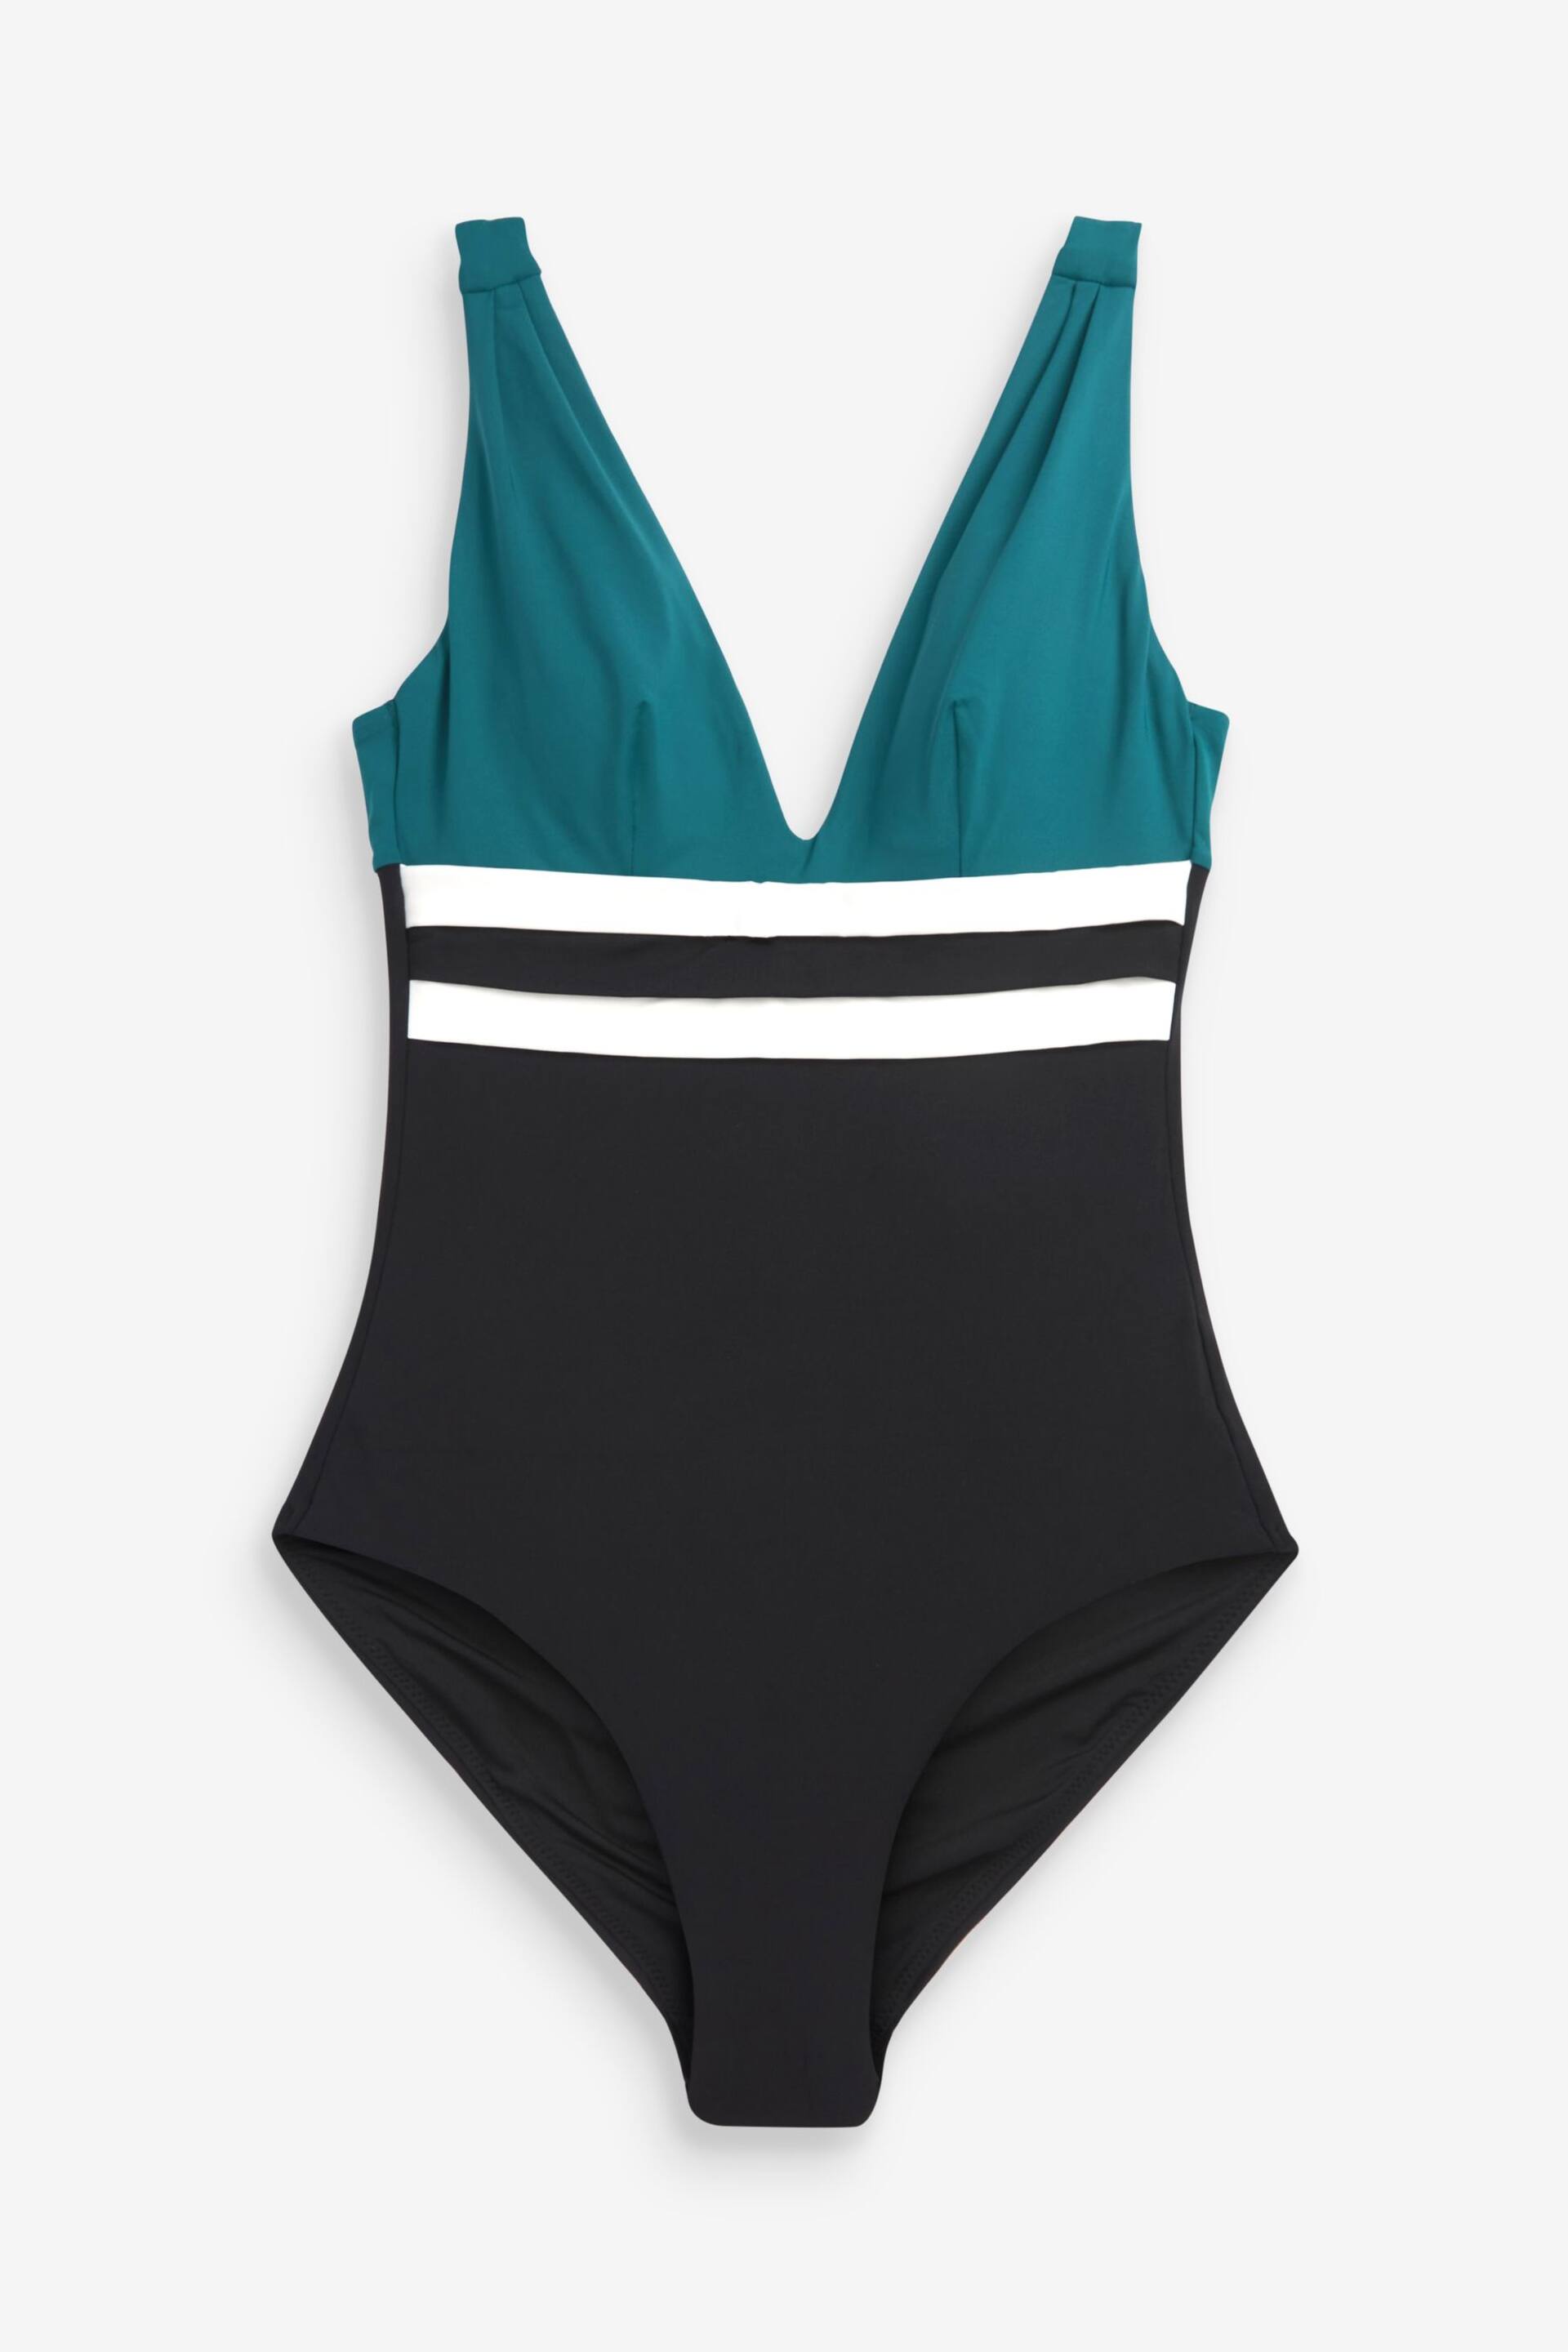 Teal Green Colourblock Print Plunge Tummy Shaping Control Swimsuit - Image 5 of 6